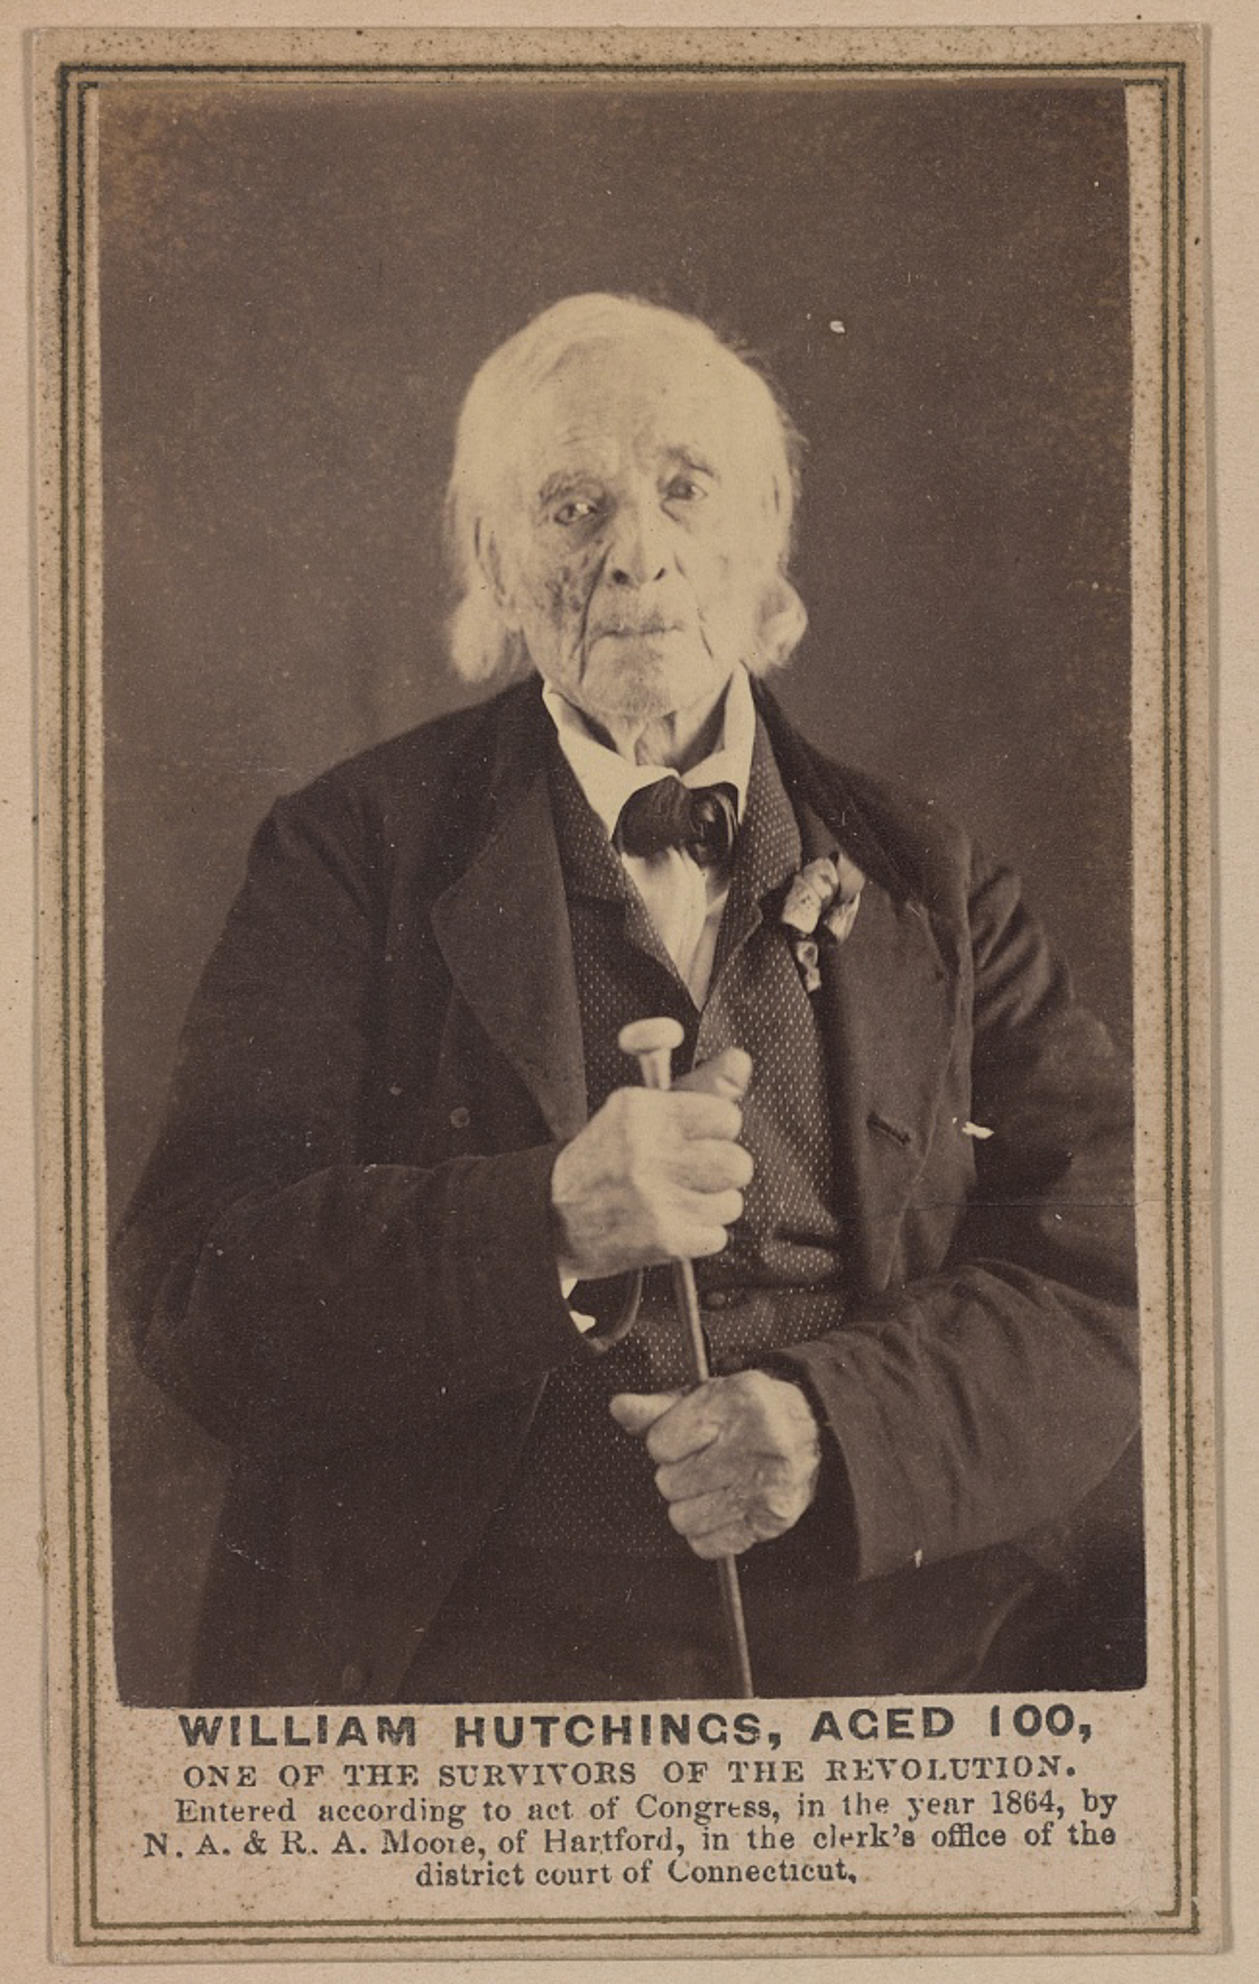 He&#x27;s 100 in the portrait and looks very old, with some white, longish hair and wearing a suit, vest, and bow tie, with caption &quot;William Hutchings, aged 100, one of the survivors of the revolution; entered according to act of Congress in the year 1864&quot;